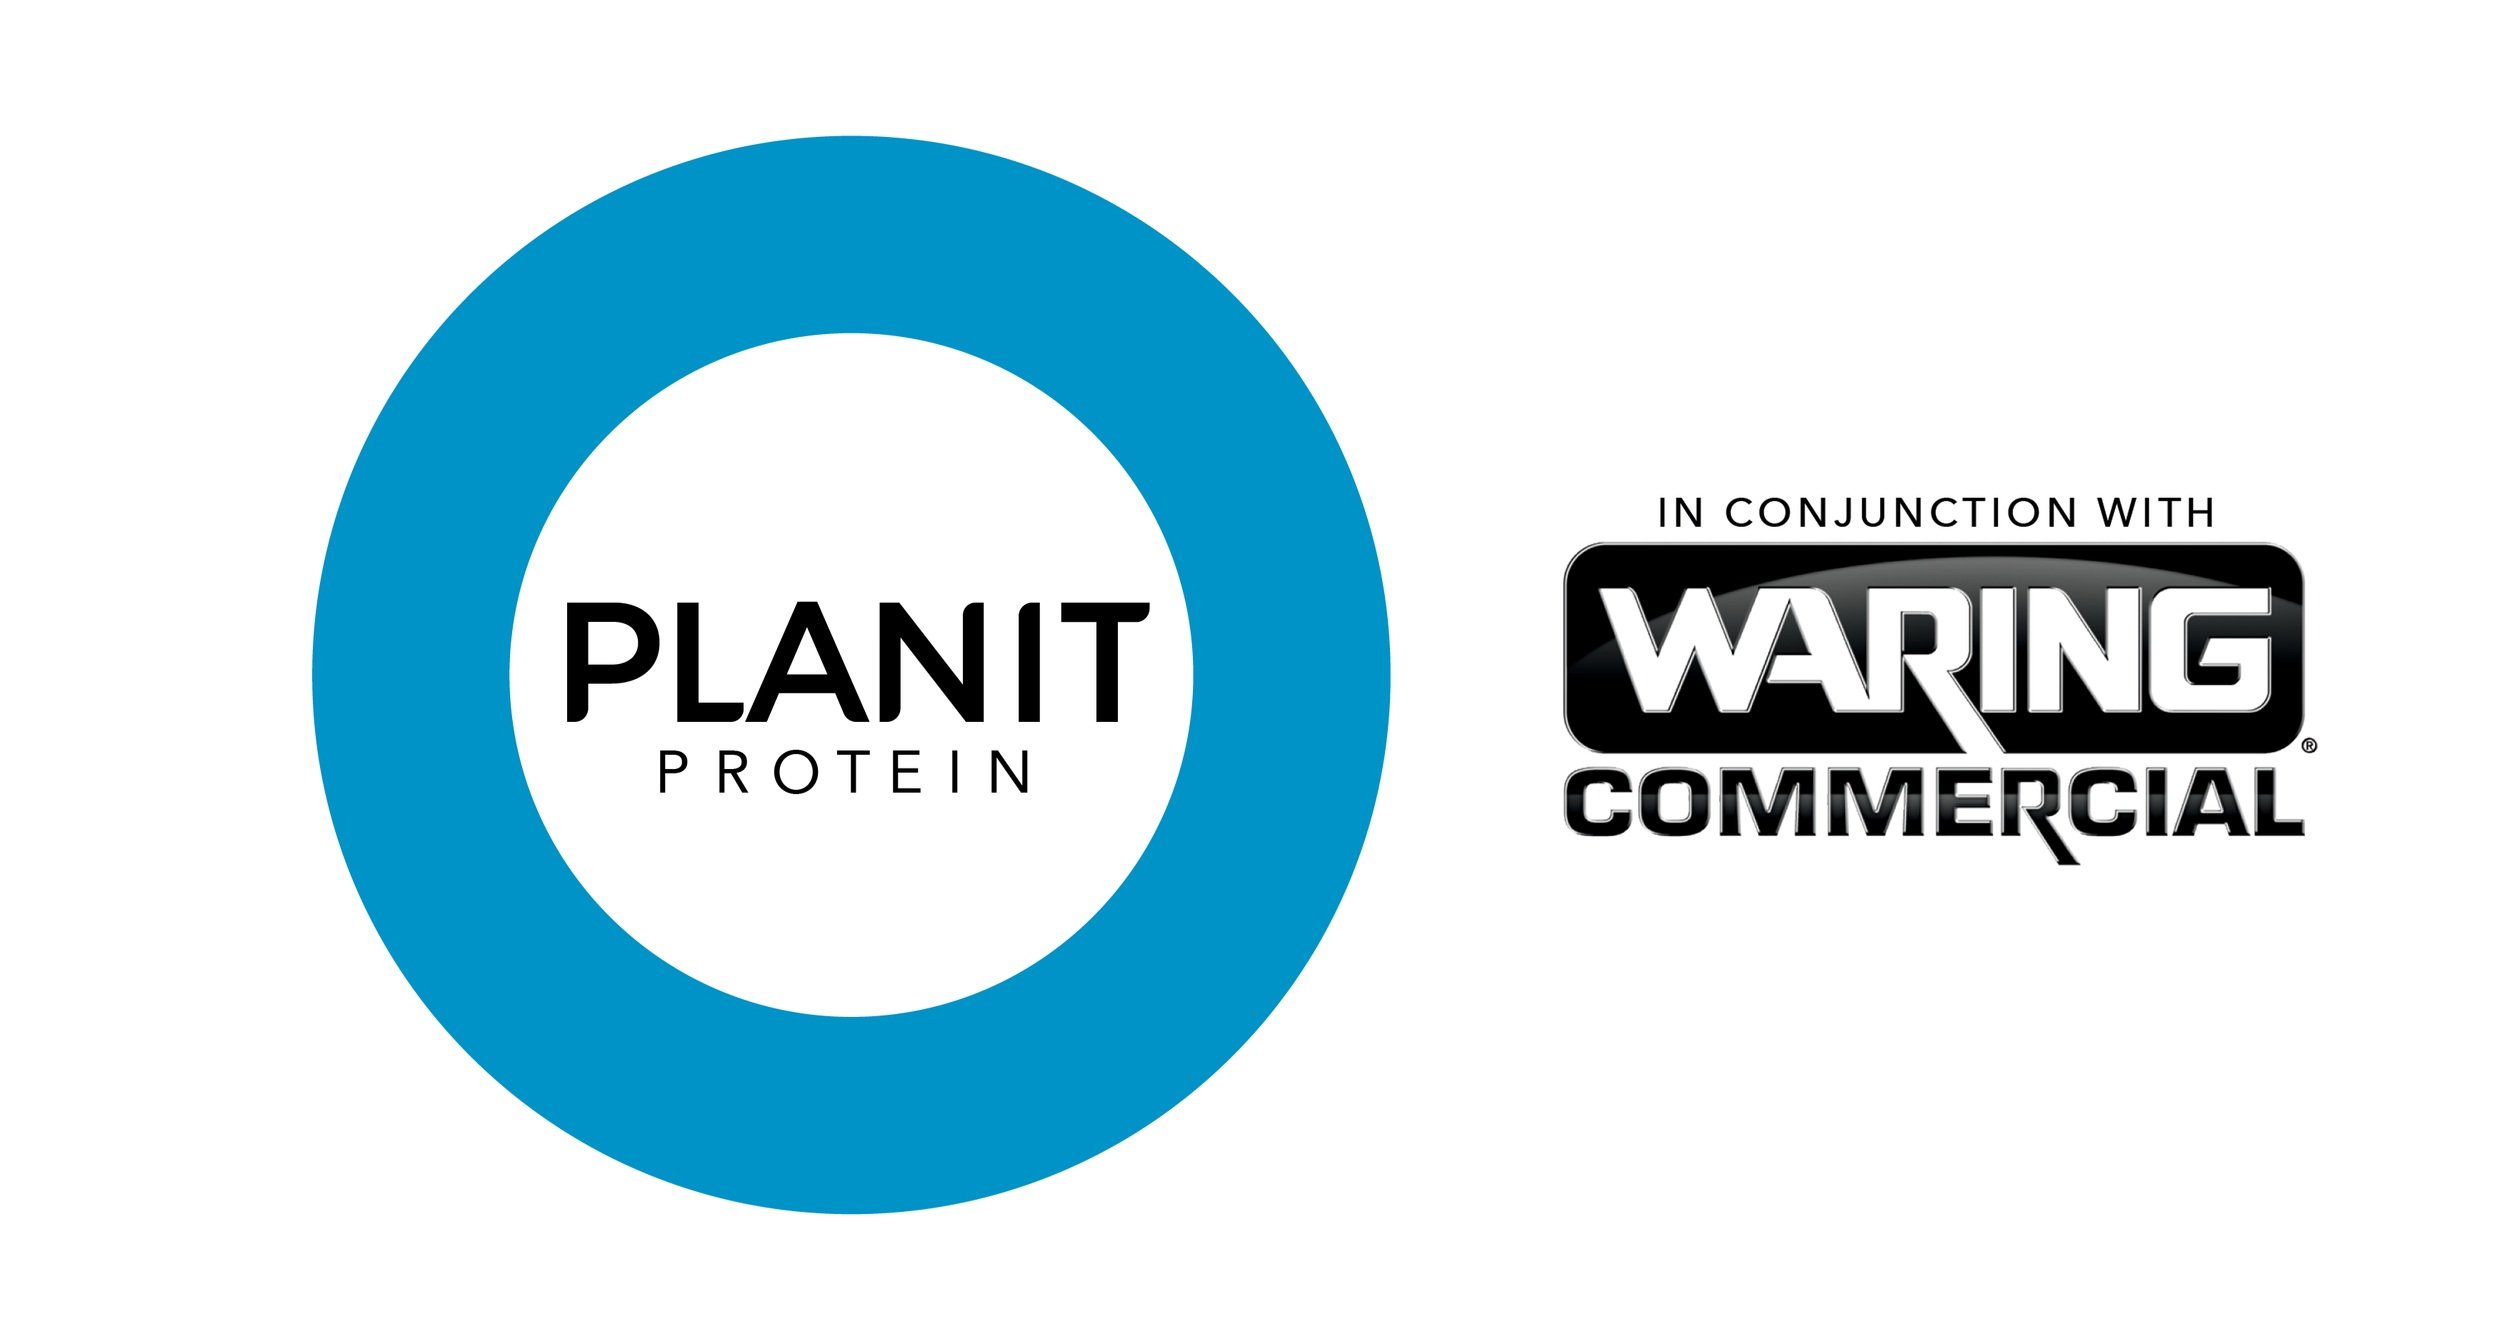 Planit Protein